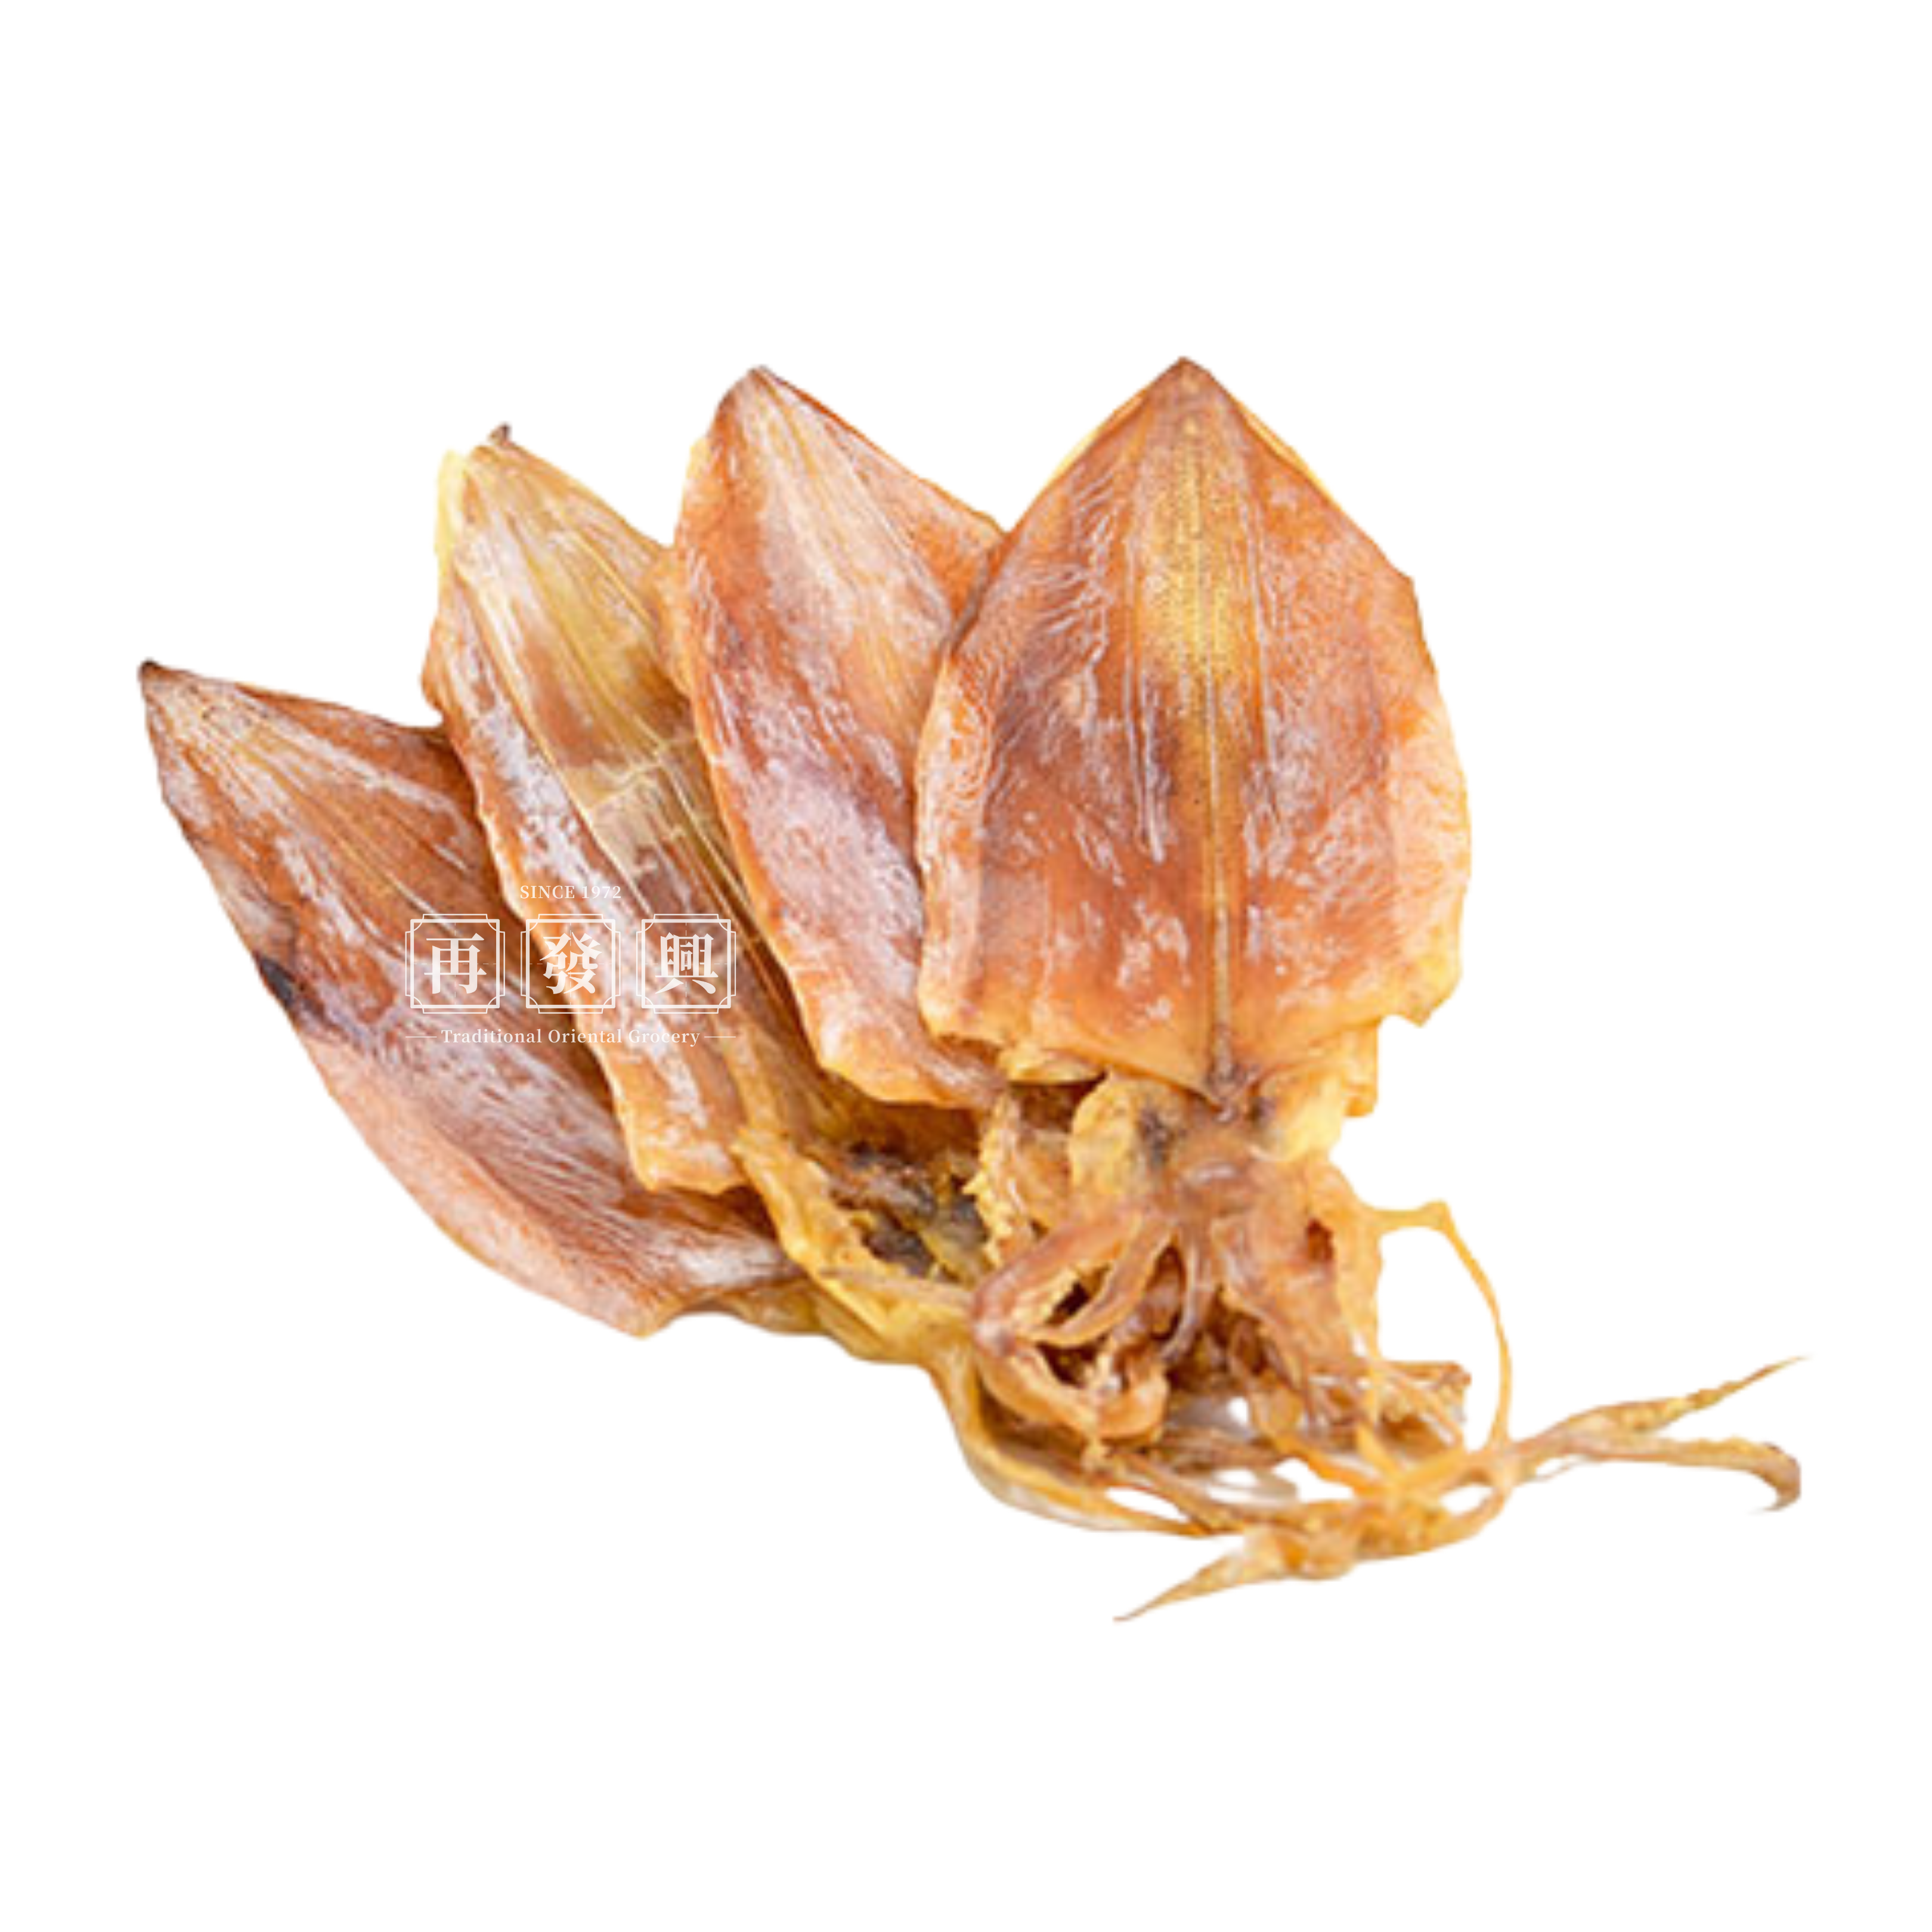 Dried Cuttlefish (Sotong Kering) 5-6 inches 200g